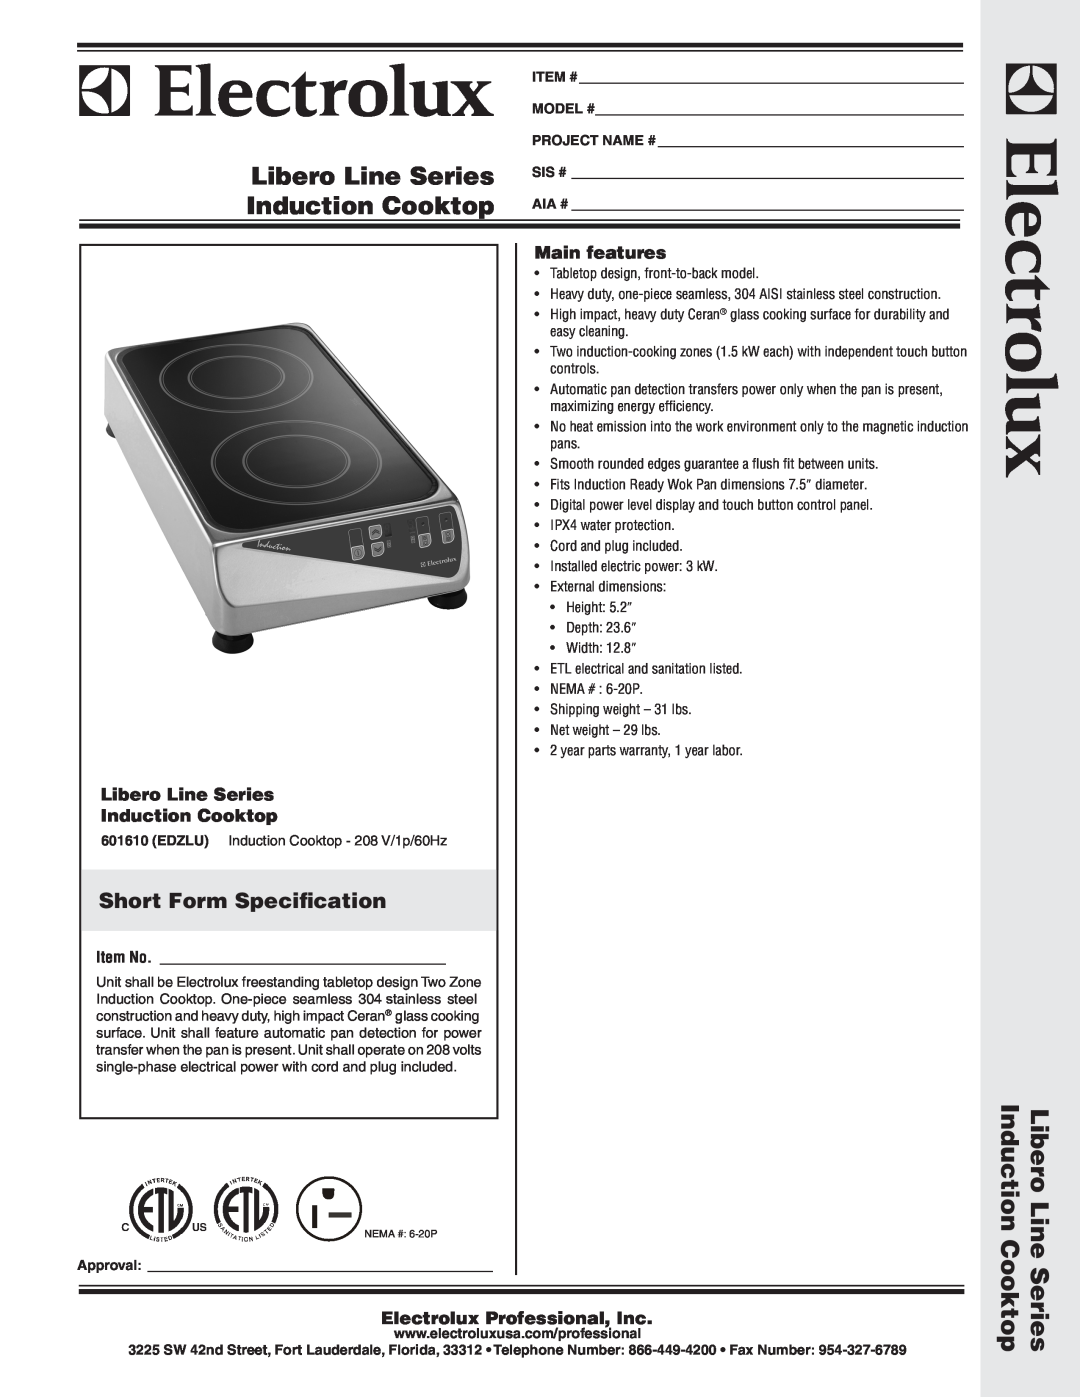 Electrolux 601610 dimensions Short Form Specification, Main features, Libero Line Series, Induction Cooktop, Item No 